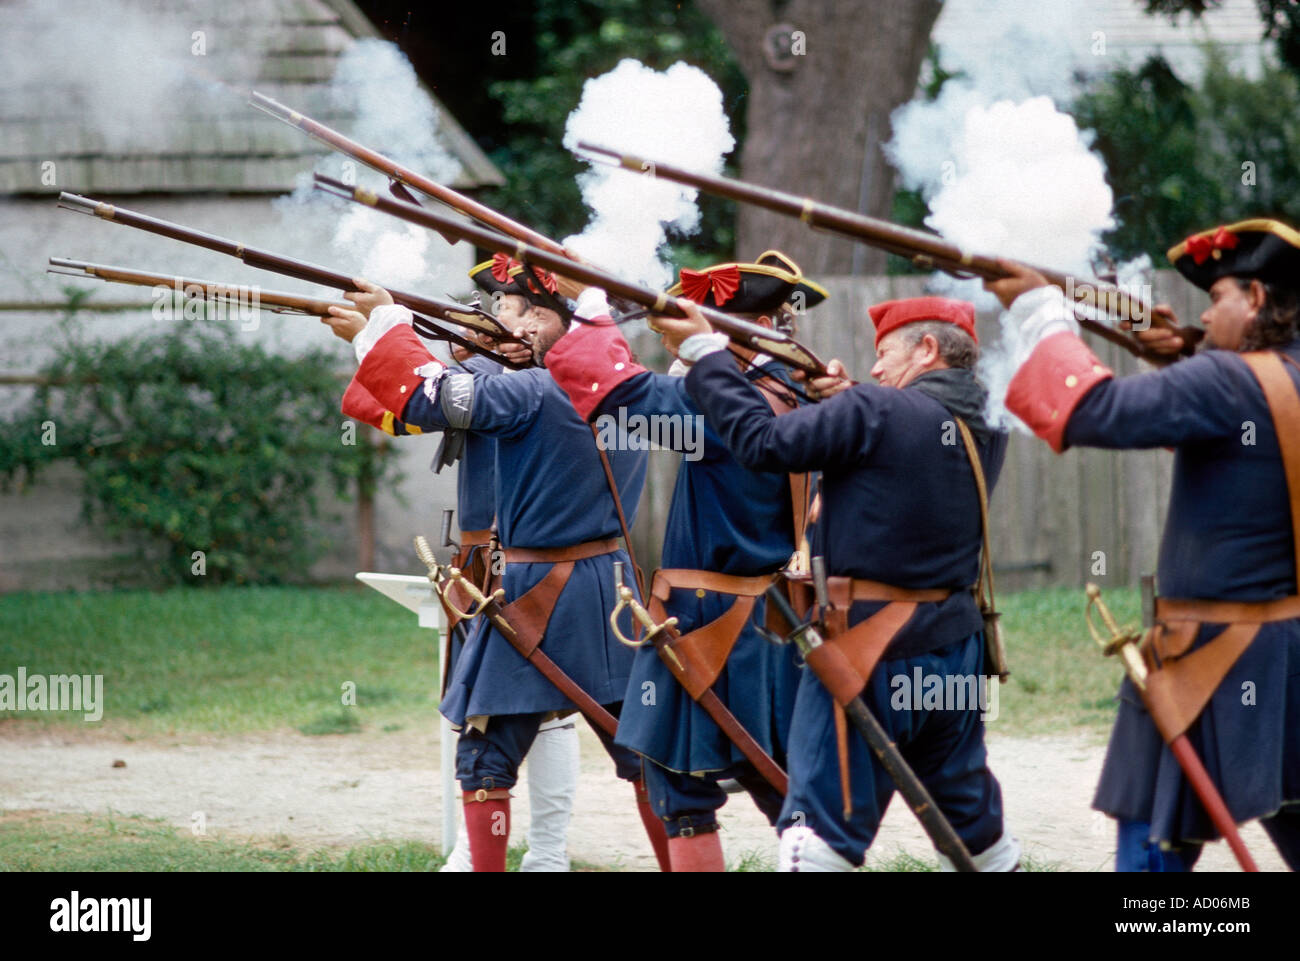 Reenactors shooting muskets at an encampment in St Augustine Florida USA Stock Photo